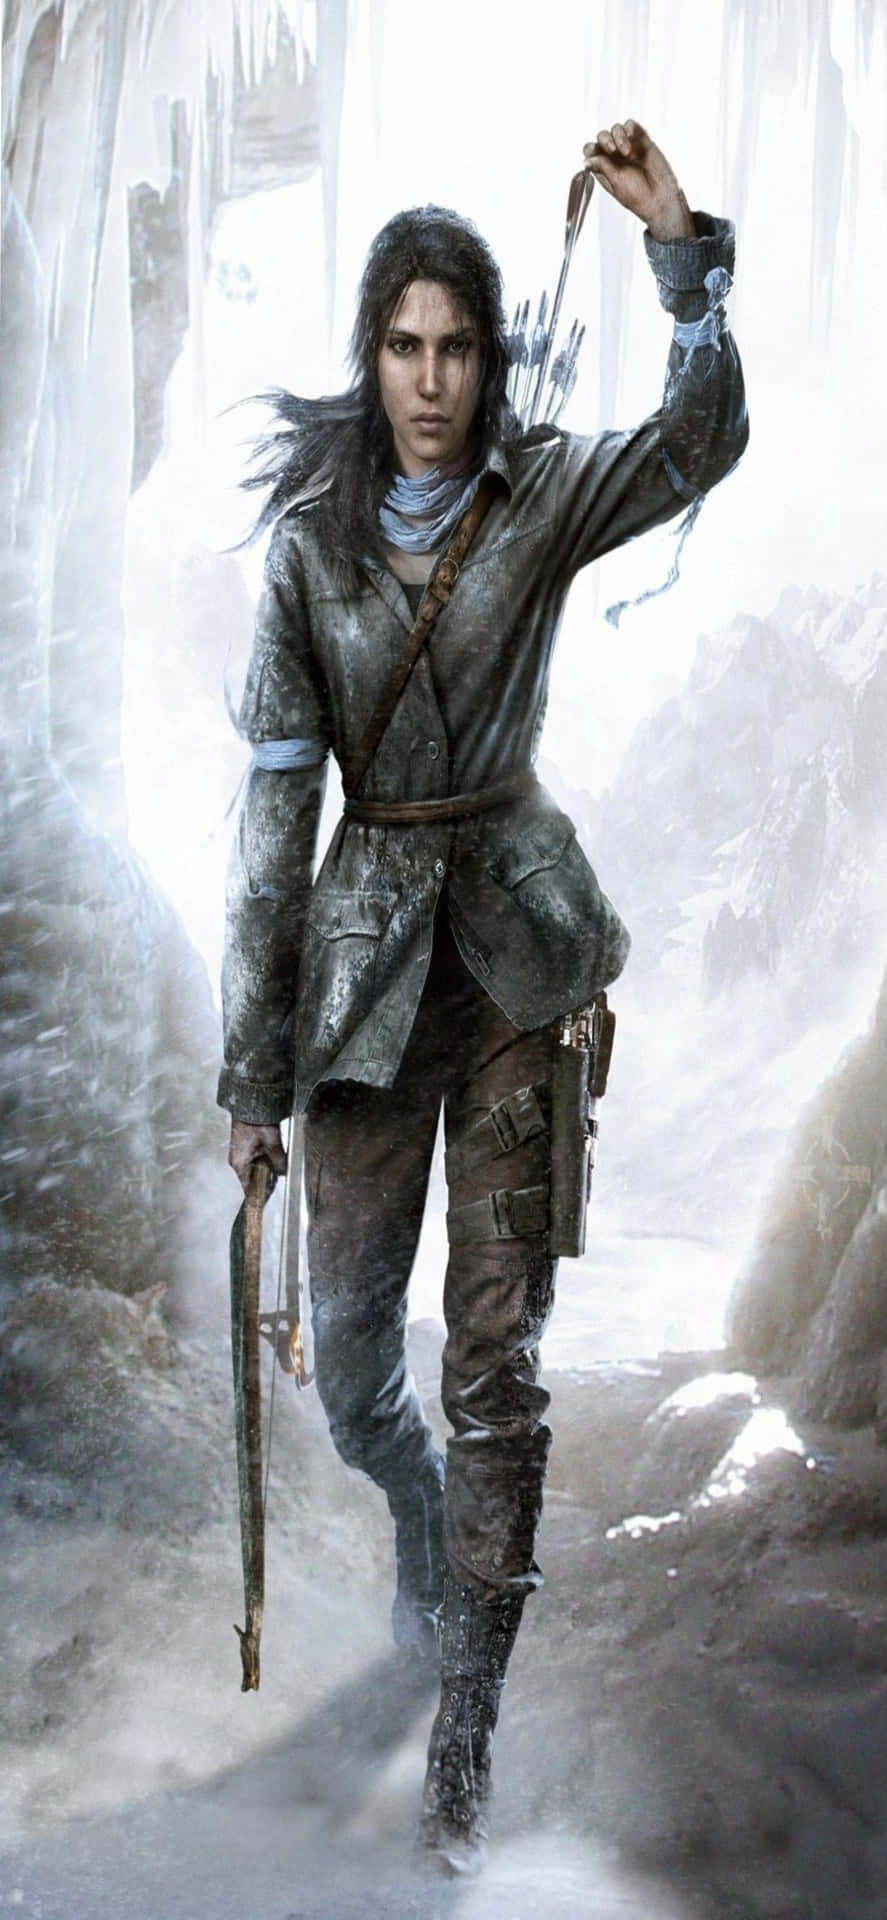 The Tomb Raider - A Woman In A Snowy Cave